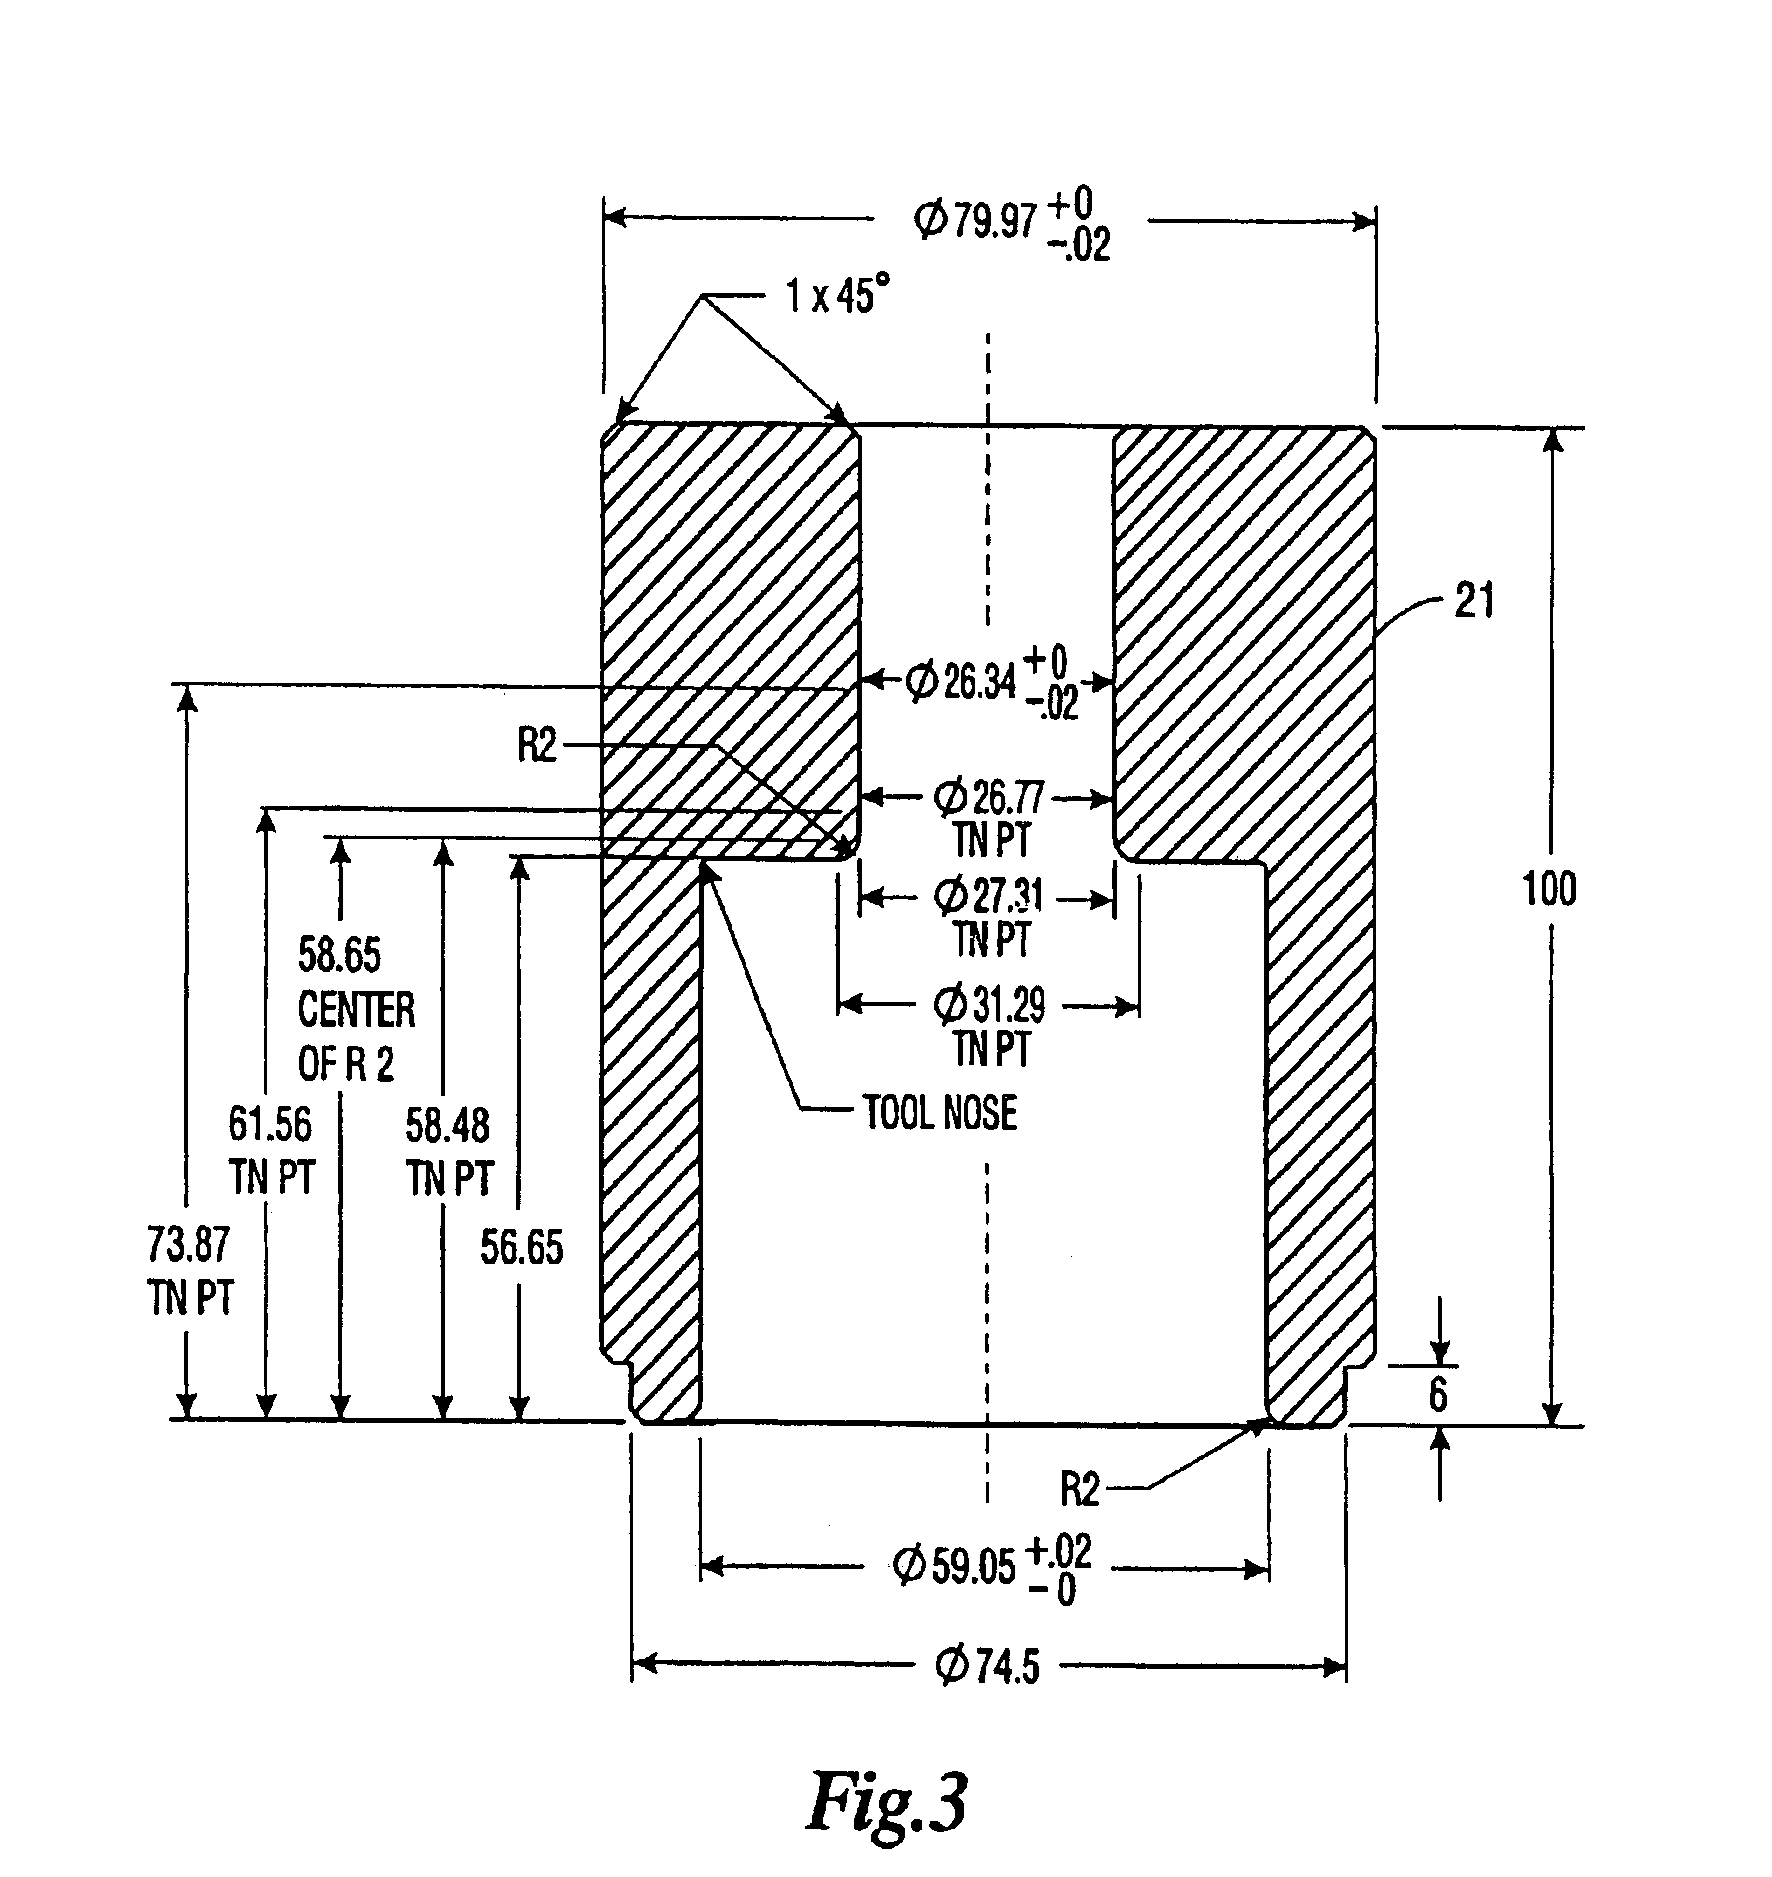 Method of affixing a threaded sleeve to the neck of an aluminum container